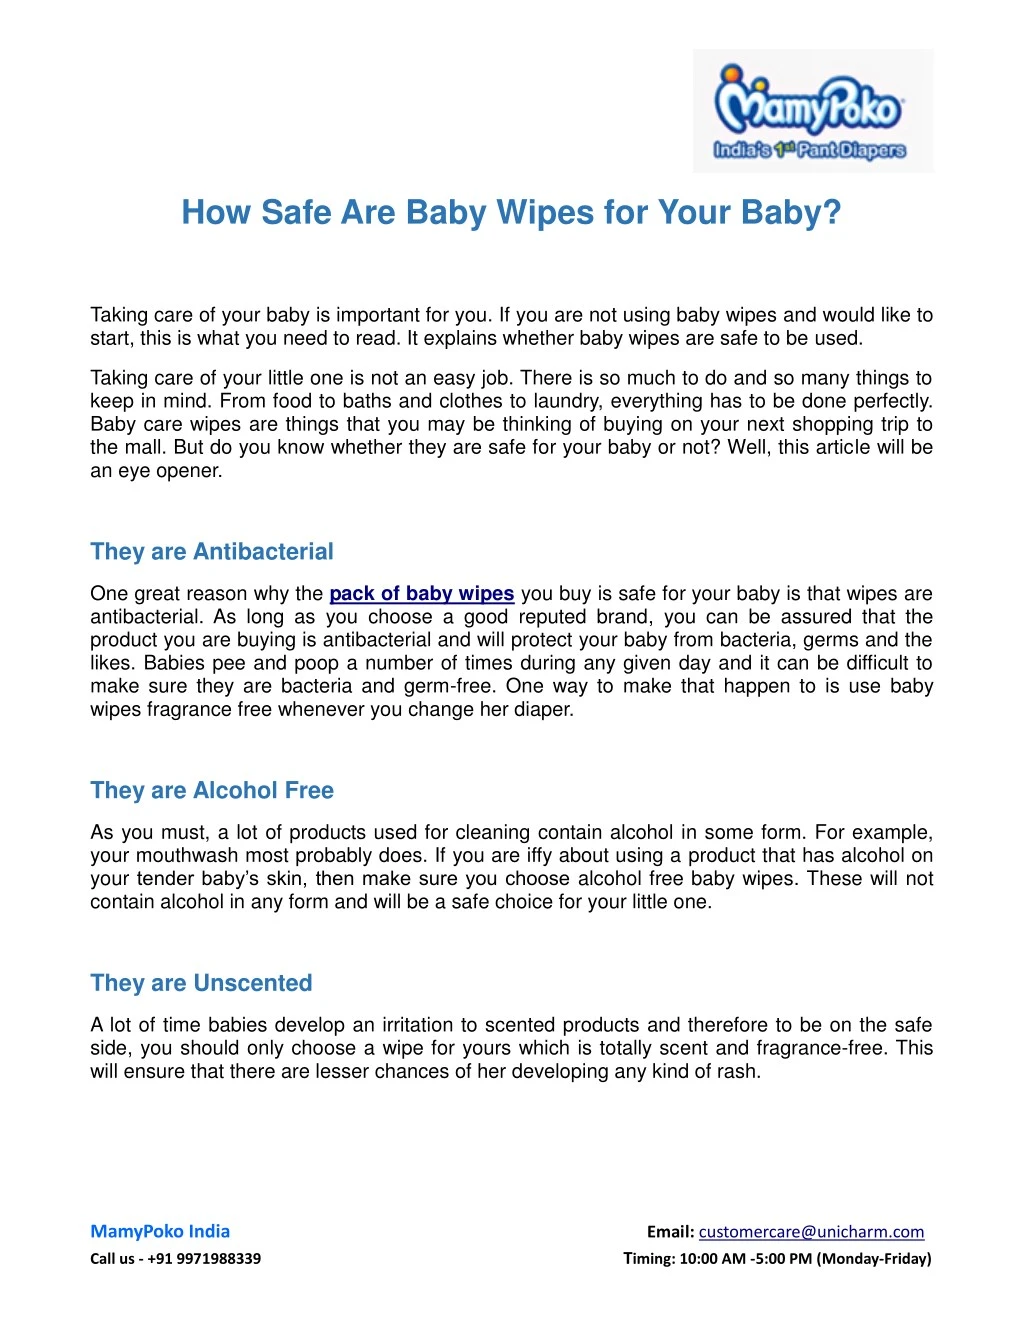 how safe are baby wipes for your baby